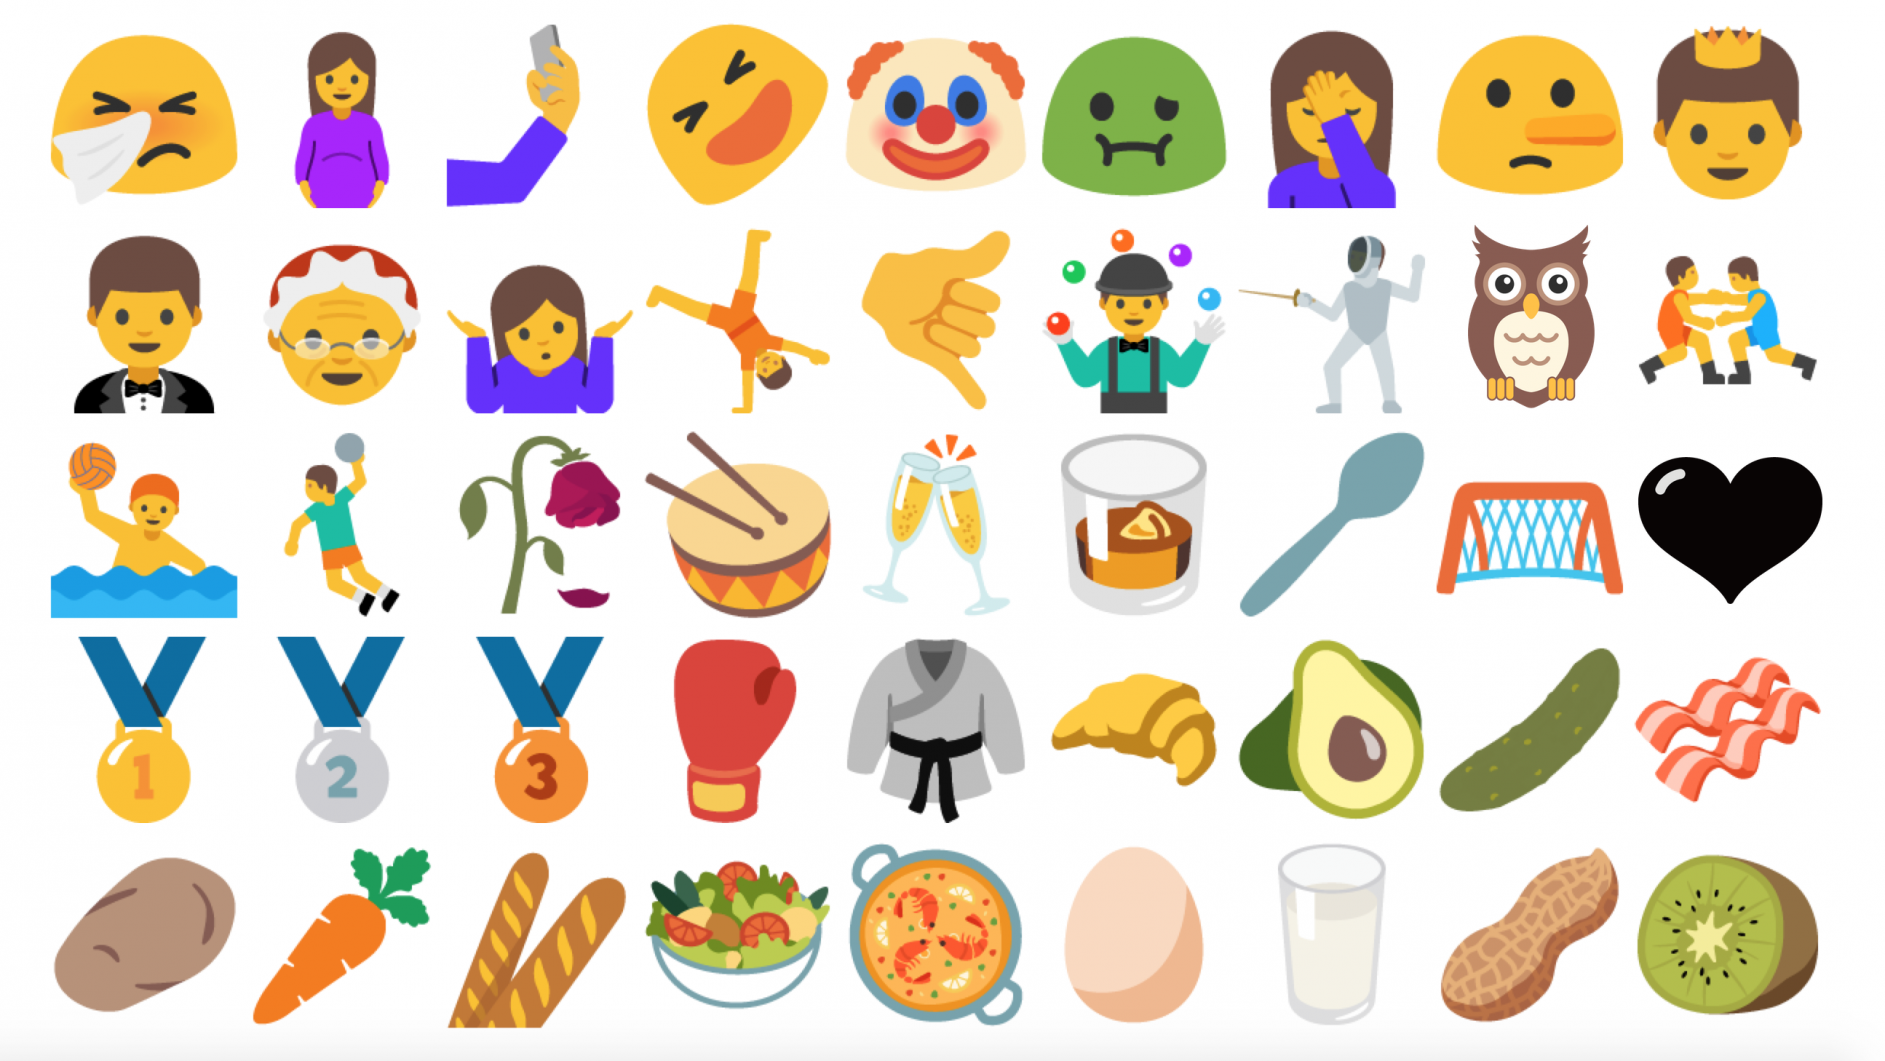 Nuove emoji Android 7.0 Nougat